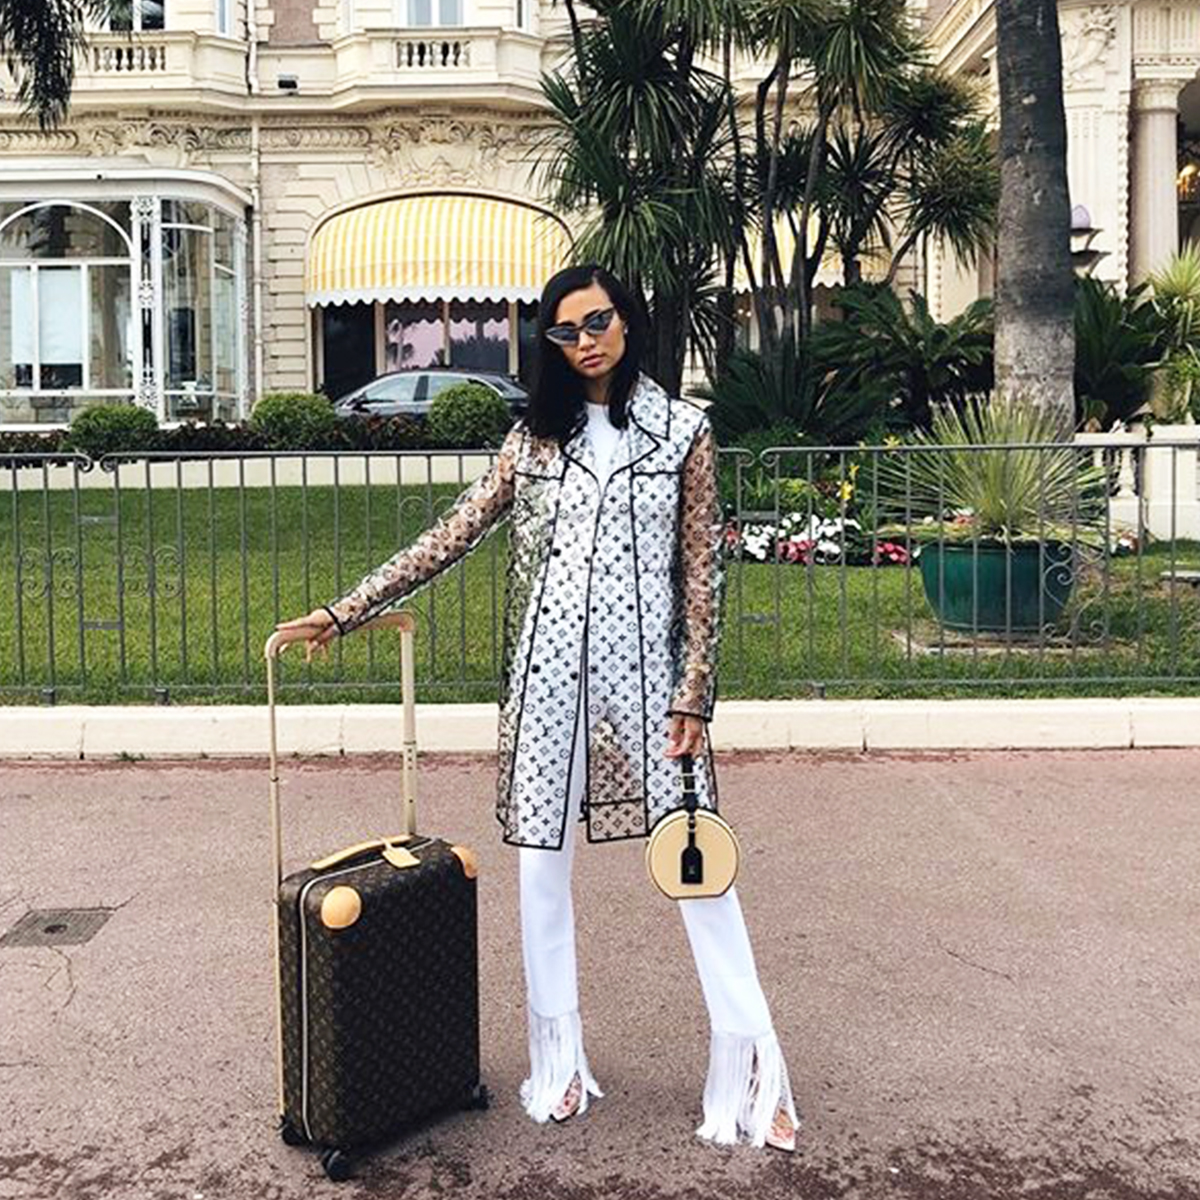 How to Shop Affordable Louis Vuitton Luggage